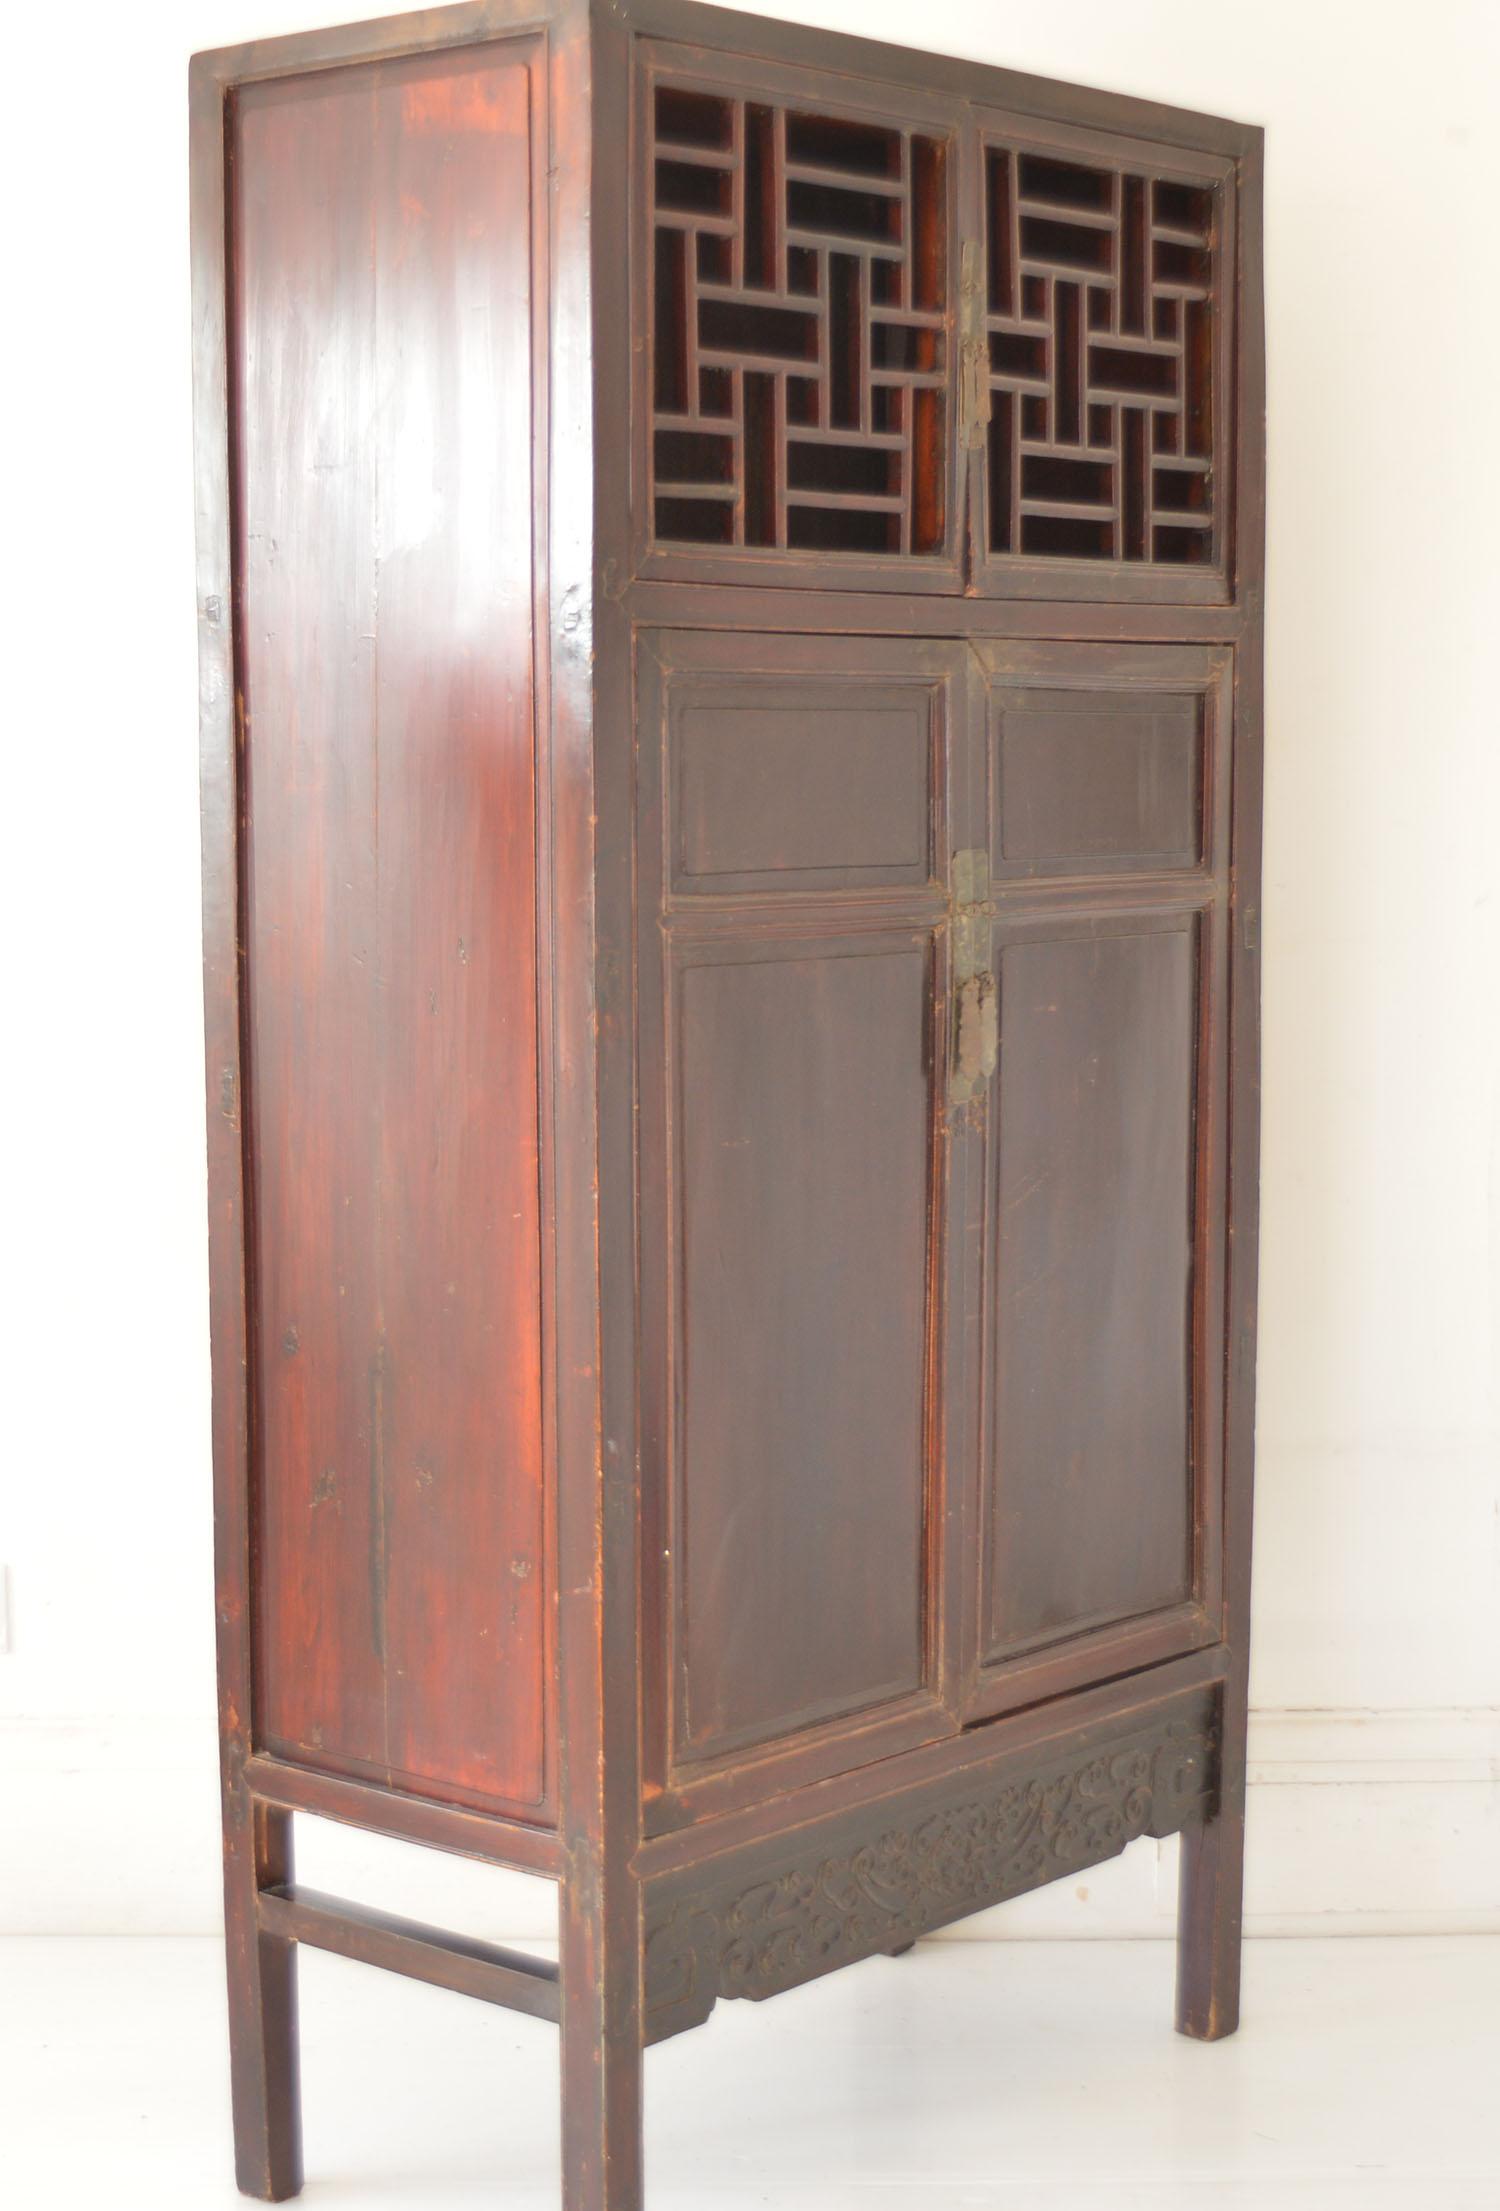 Fruitwood Antique Chinese Lacquered Cabinet with Lattice Work Doors, 19th Century